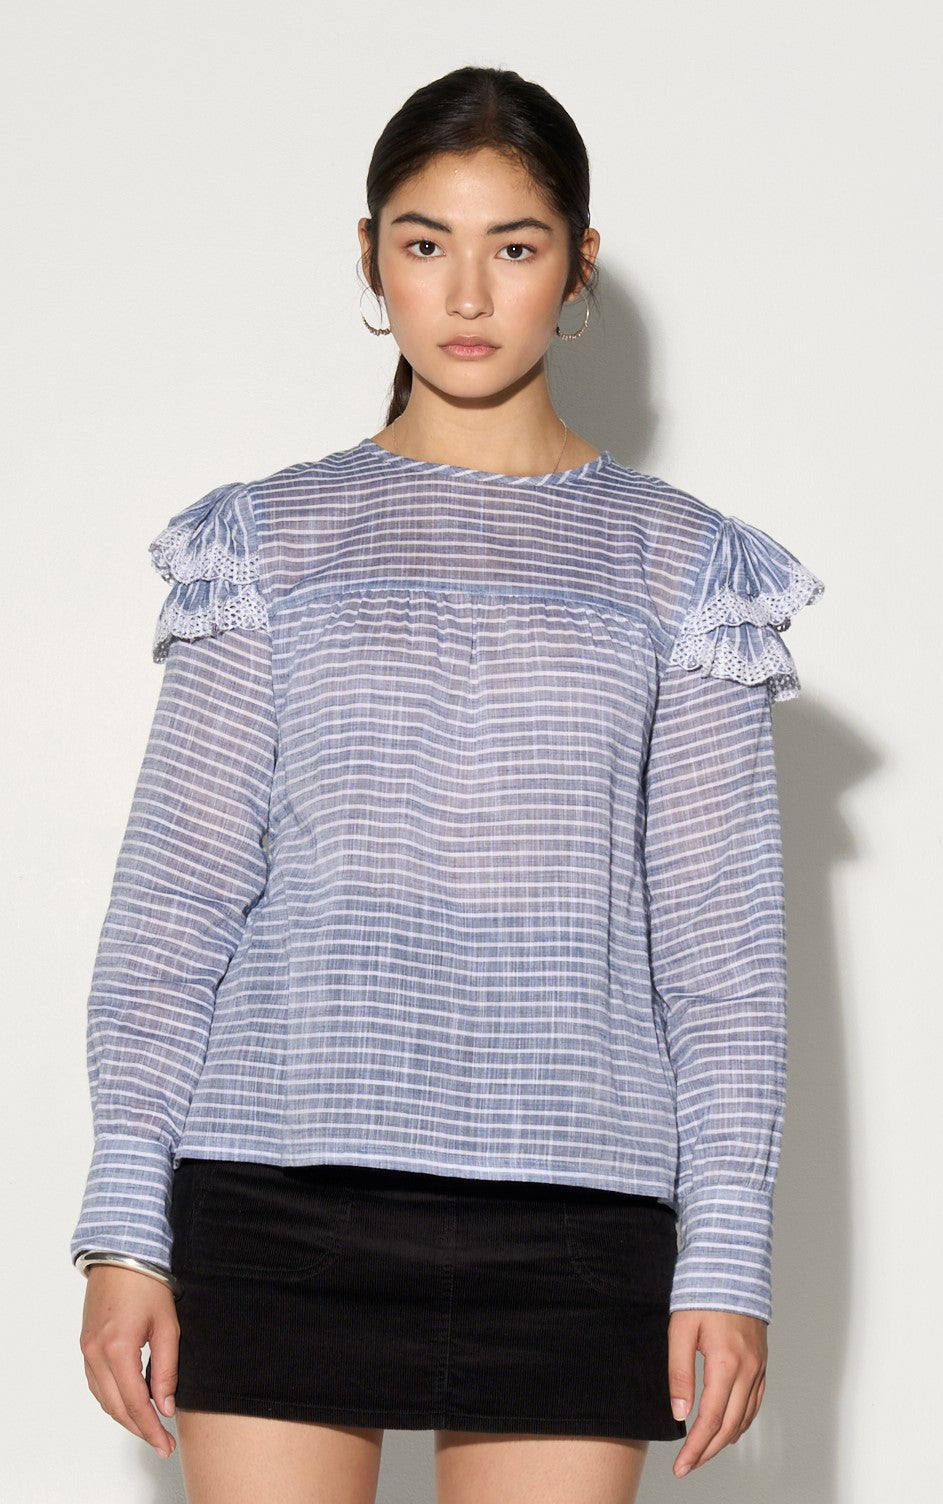 NINETTE striped top with shoulder ruffles